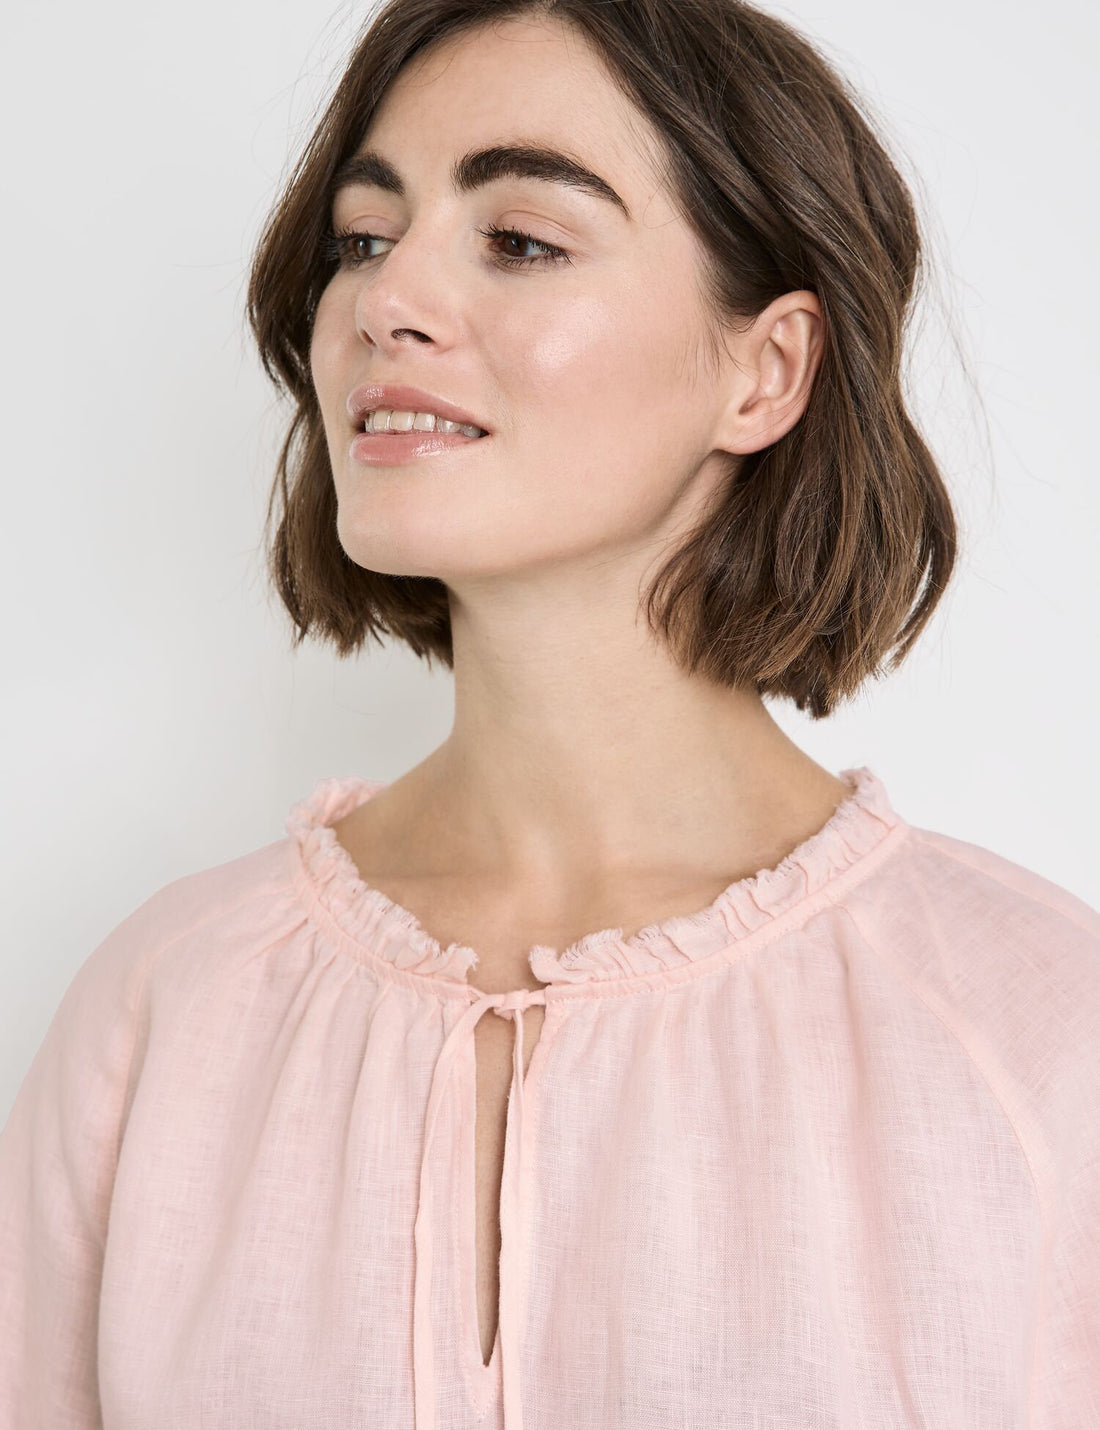 Blouse With 3/4-Length Sleeves And A Frilled Collar_260020-66435_30915_02